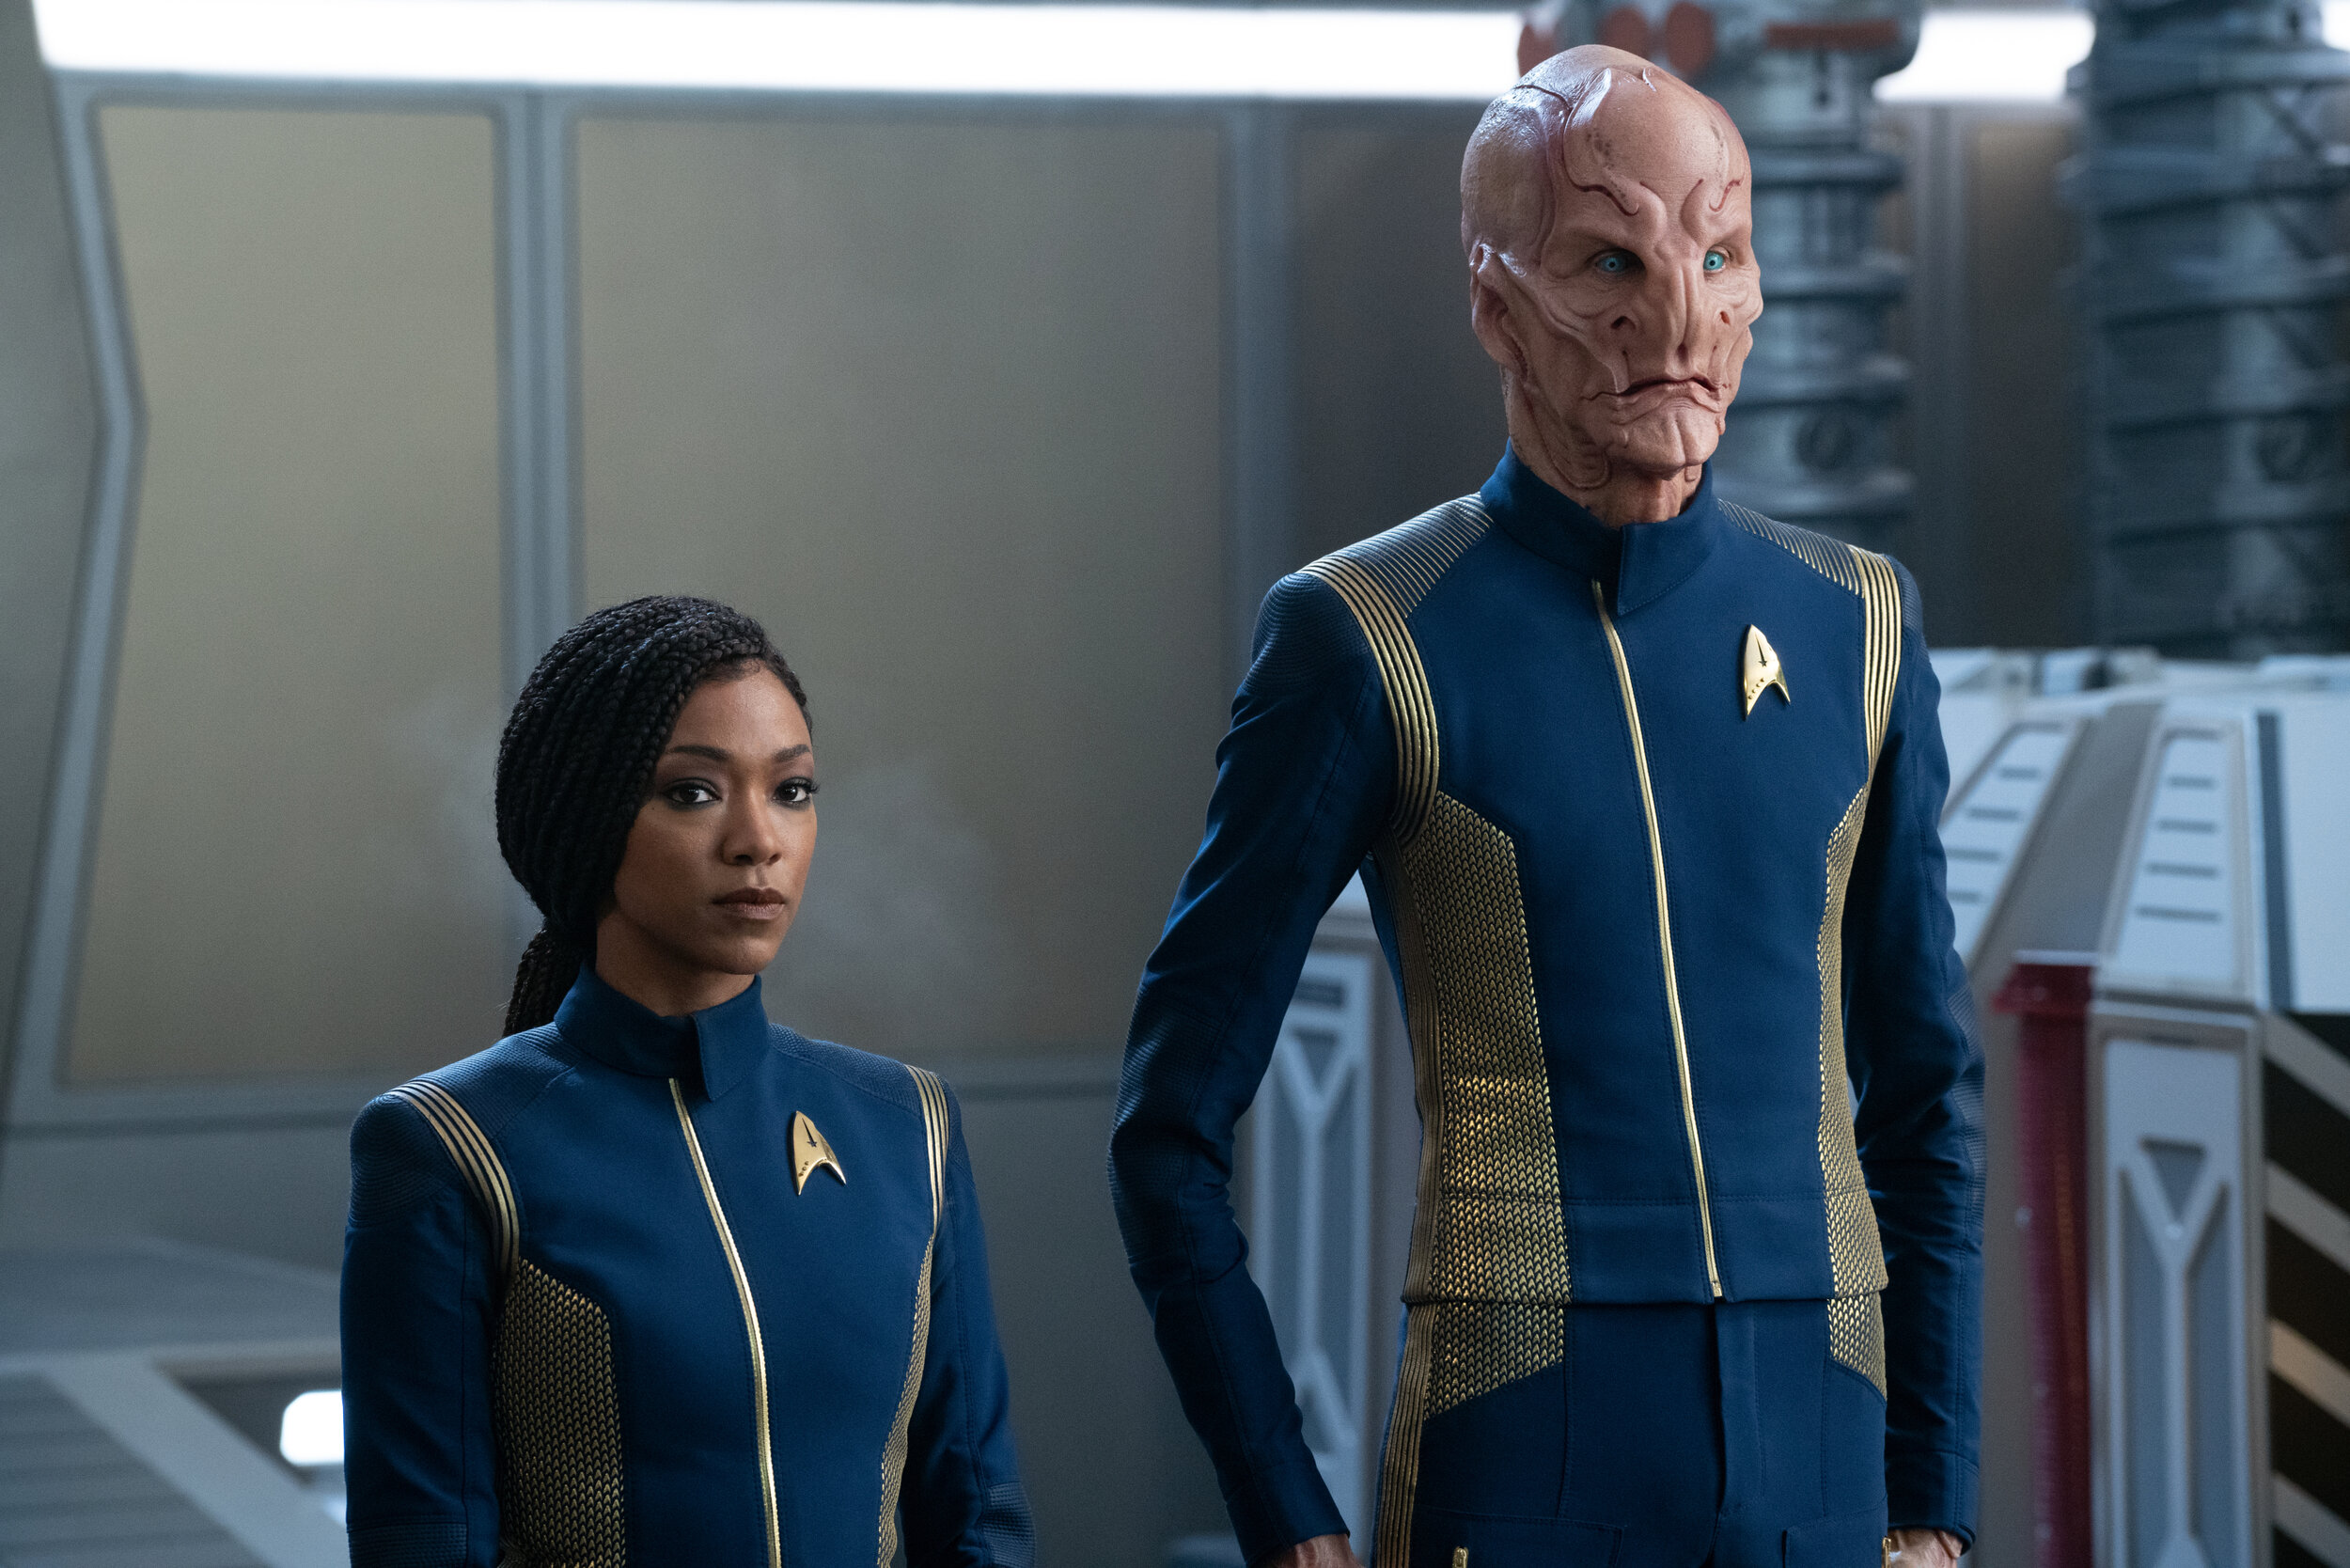   "Die Trying" -- Ep#305 -- Pictured: Sonequa Martin-Green as Burnham and Doug Jones as Saru of the CBS All Access series STAR TREK: DISCOVERY. Photo Cr: Michael Gibson/CBS ©2020 CBS Interactive, Inc. All Rights Reserved.  